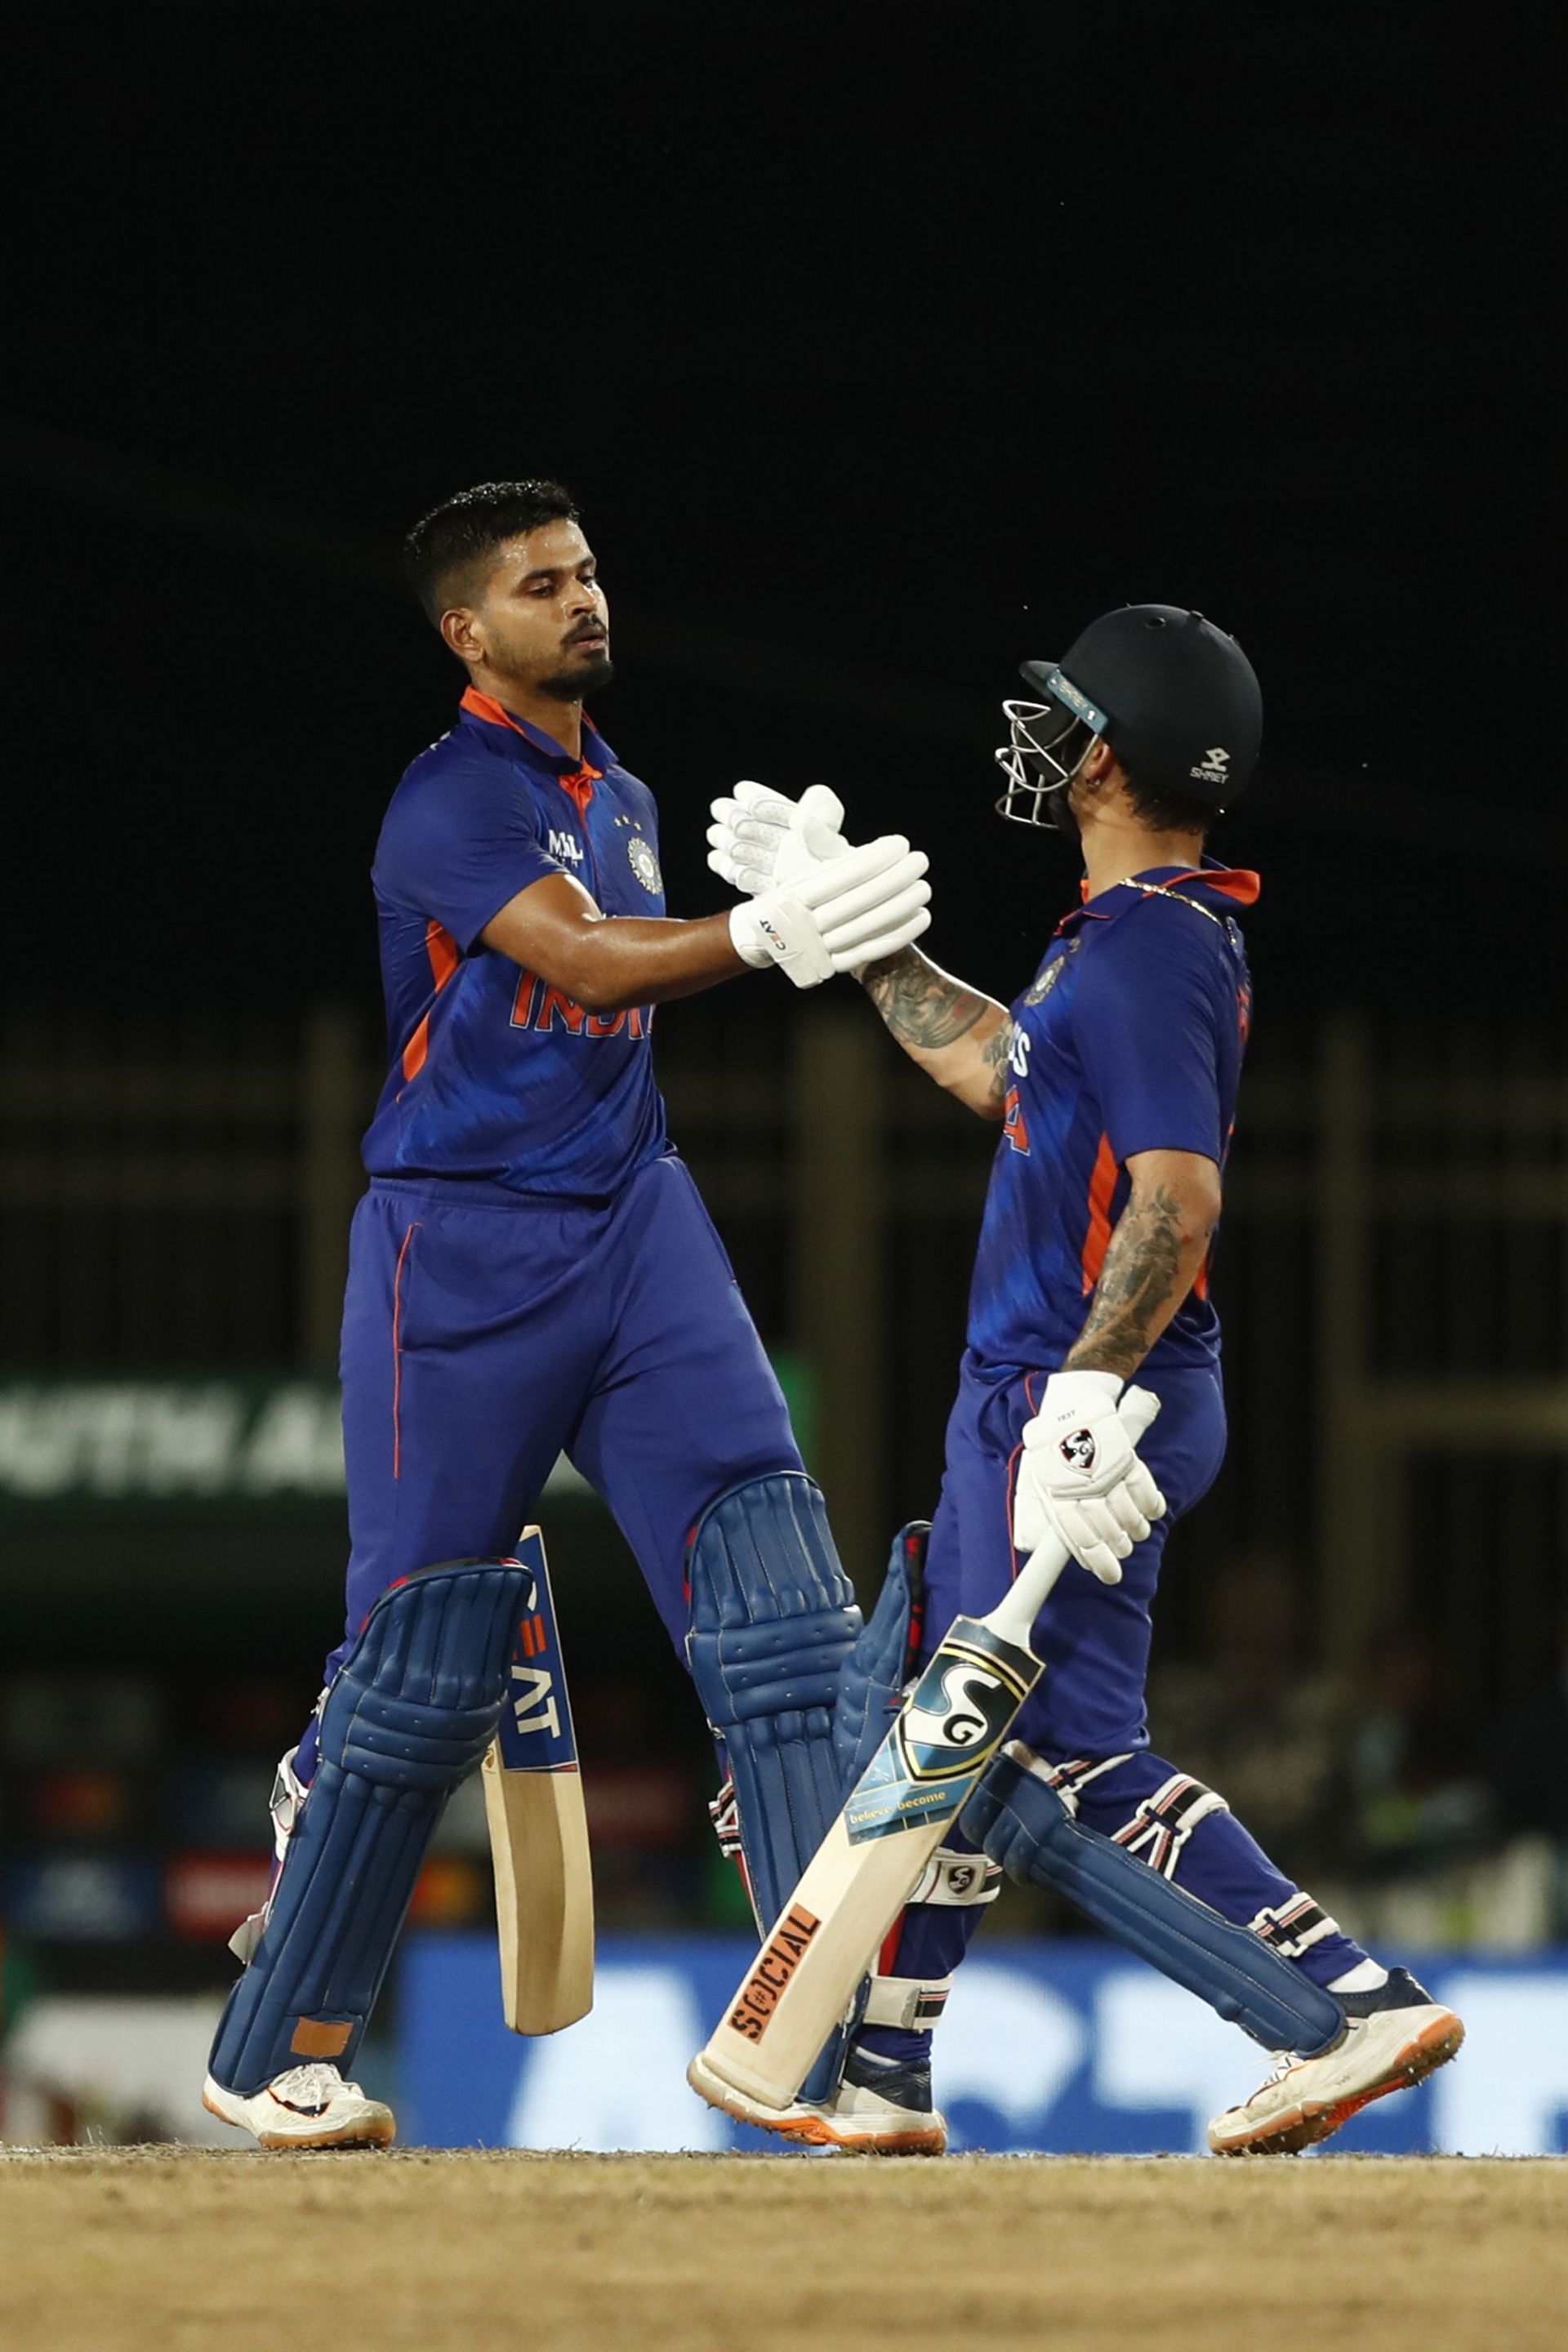 Shreyas Iyer and Ishan Kishan batted superbly on Sunday vs South Africa [Pic Credit: Getty Images]